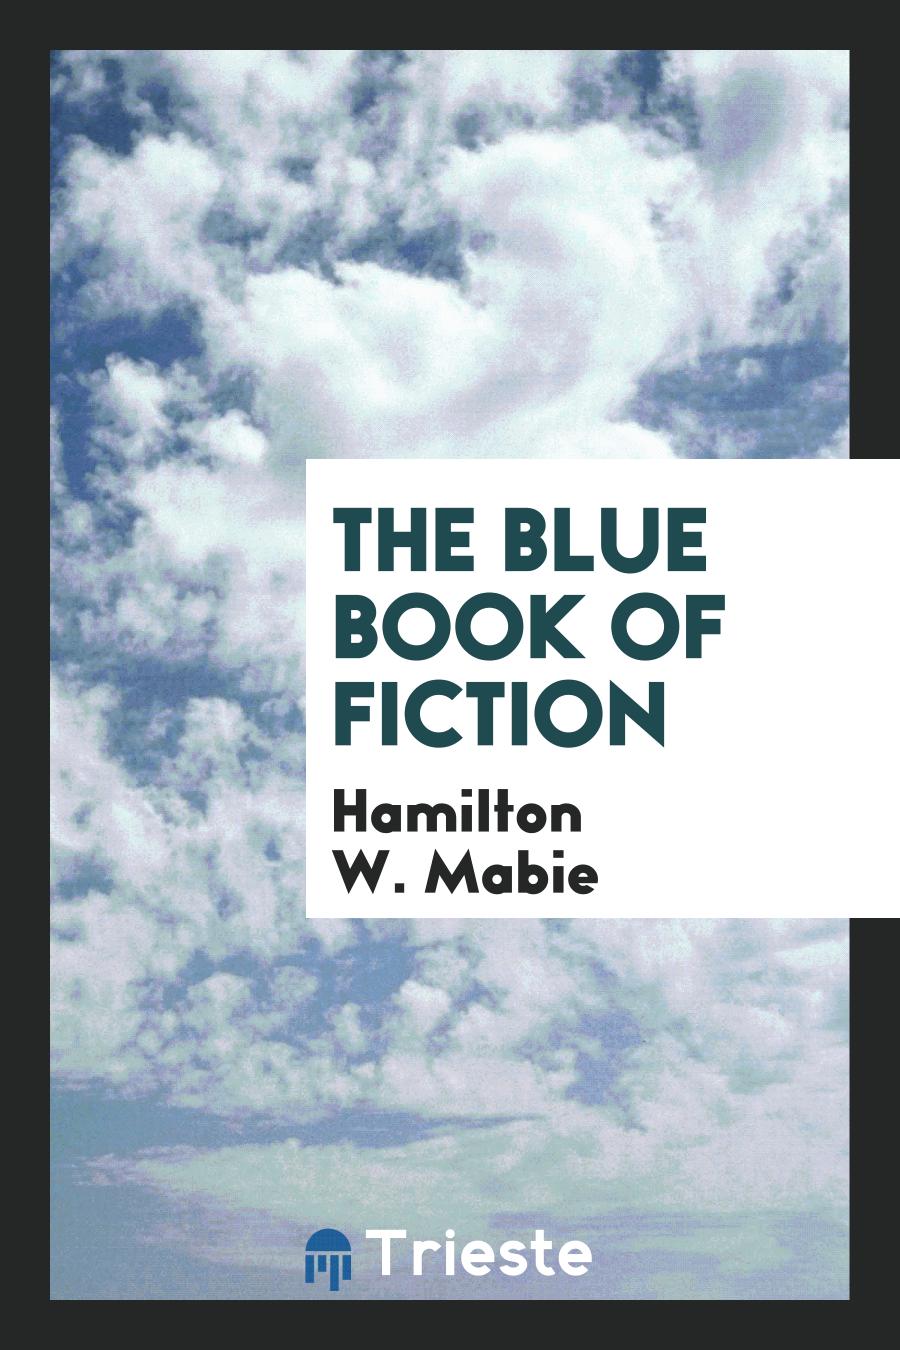 The blue book of fiction